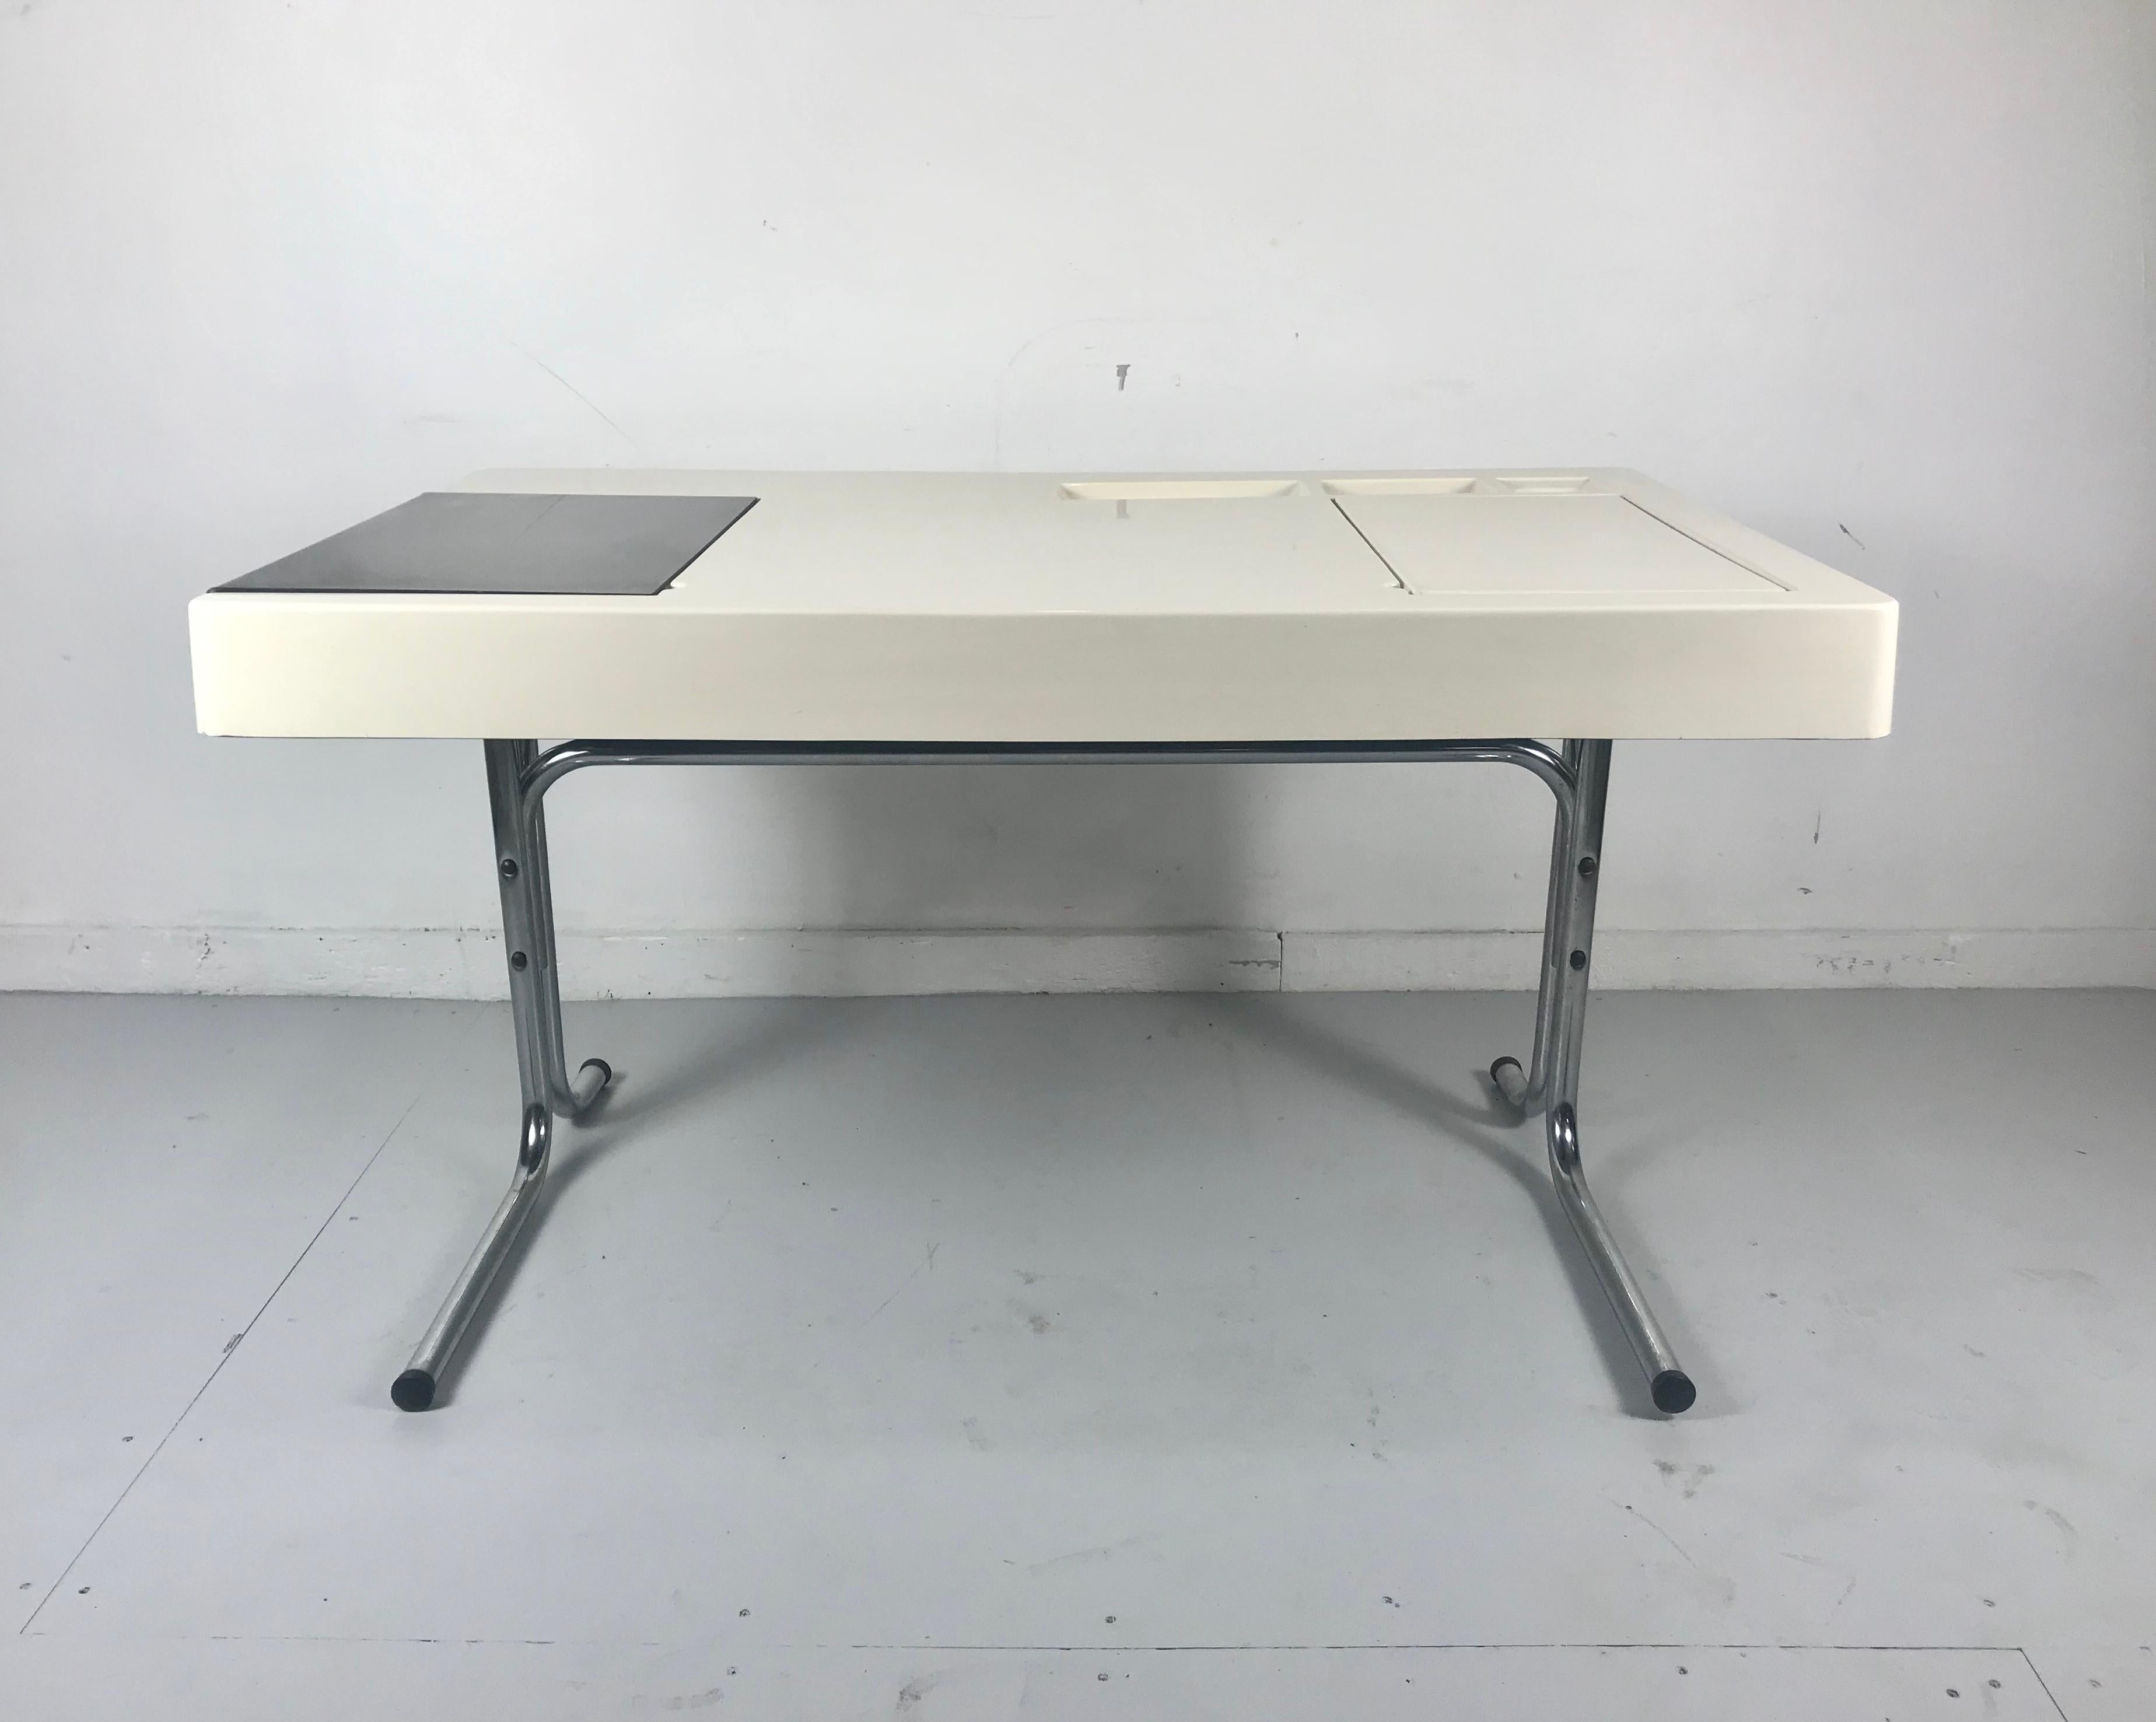 Space Age, futuristic plastic desk, Italian Design, 1970s,, Sleek .simple, modernist, moulded plastic and tubular chrome. Unusual right and left lids for storage, left lid smoke brown see thru acrylic. Hand delivery avail to New York City or